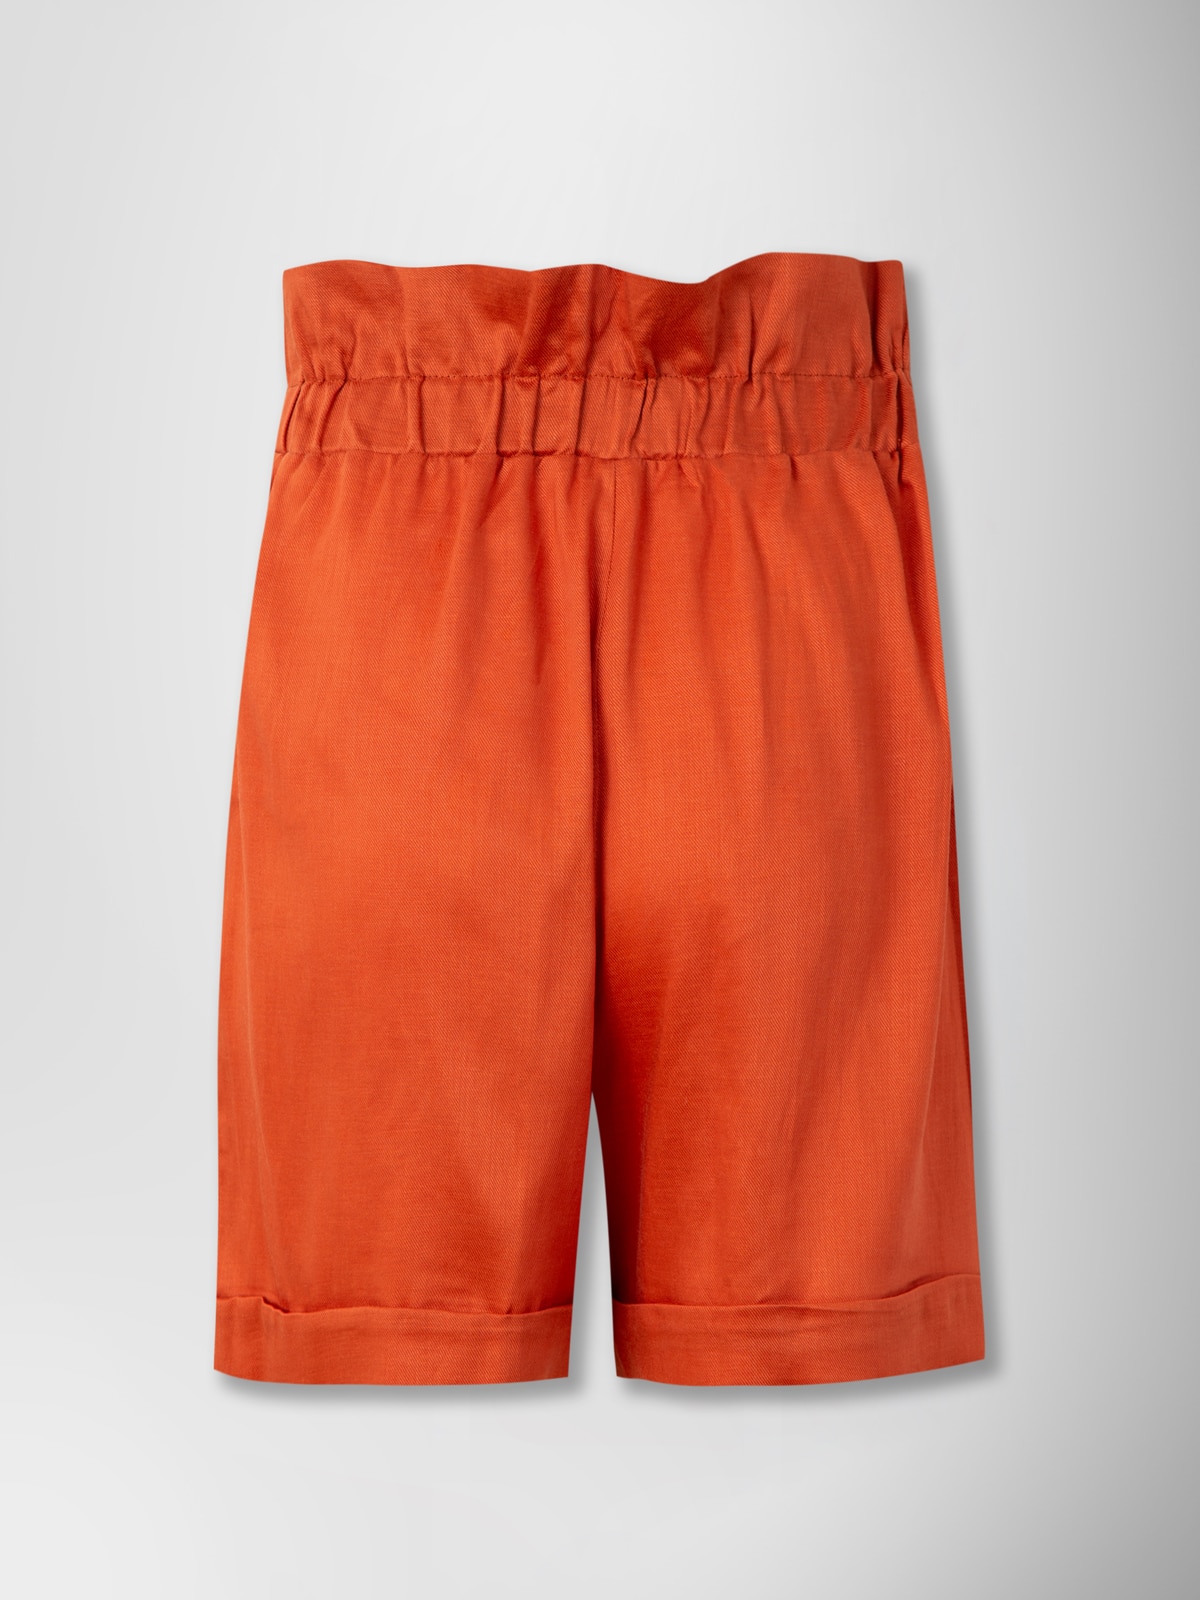 HIGH RISE SHORTS WITH BUTTONS ORANGE